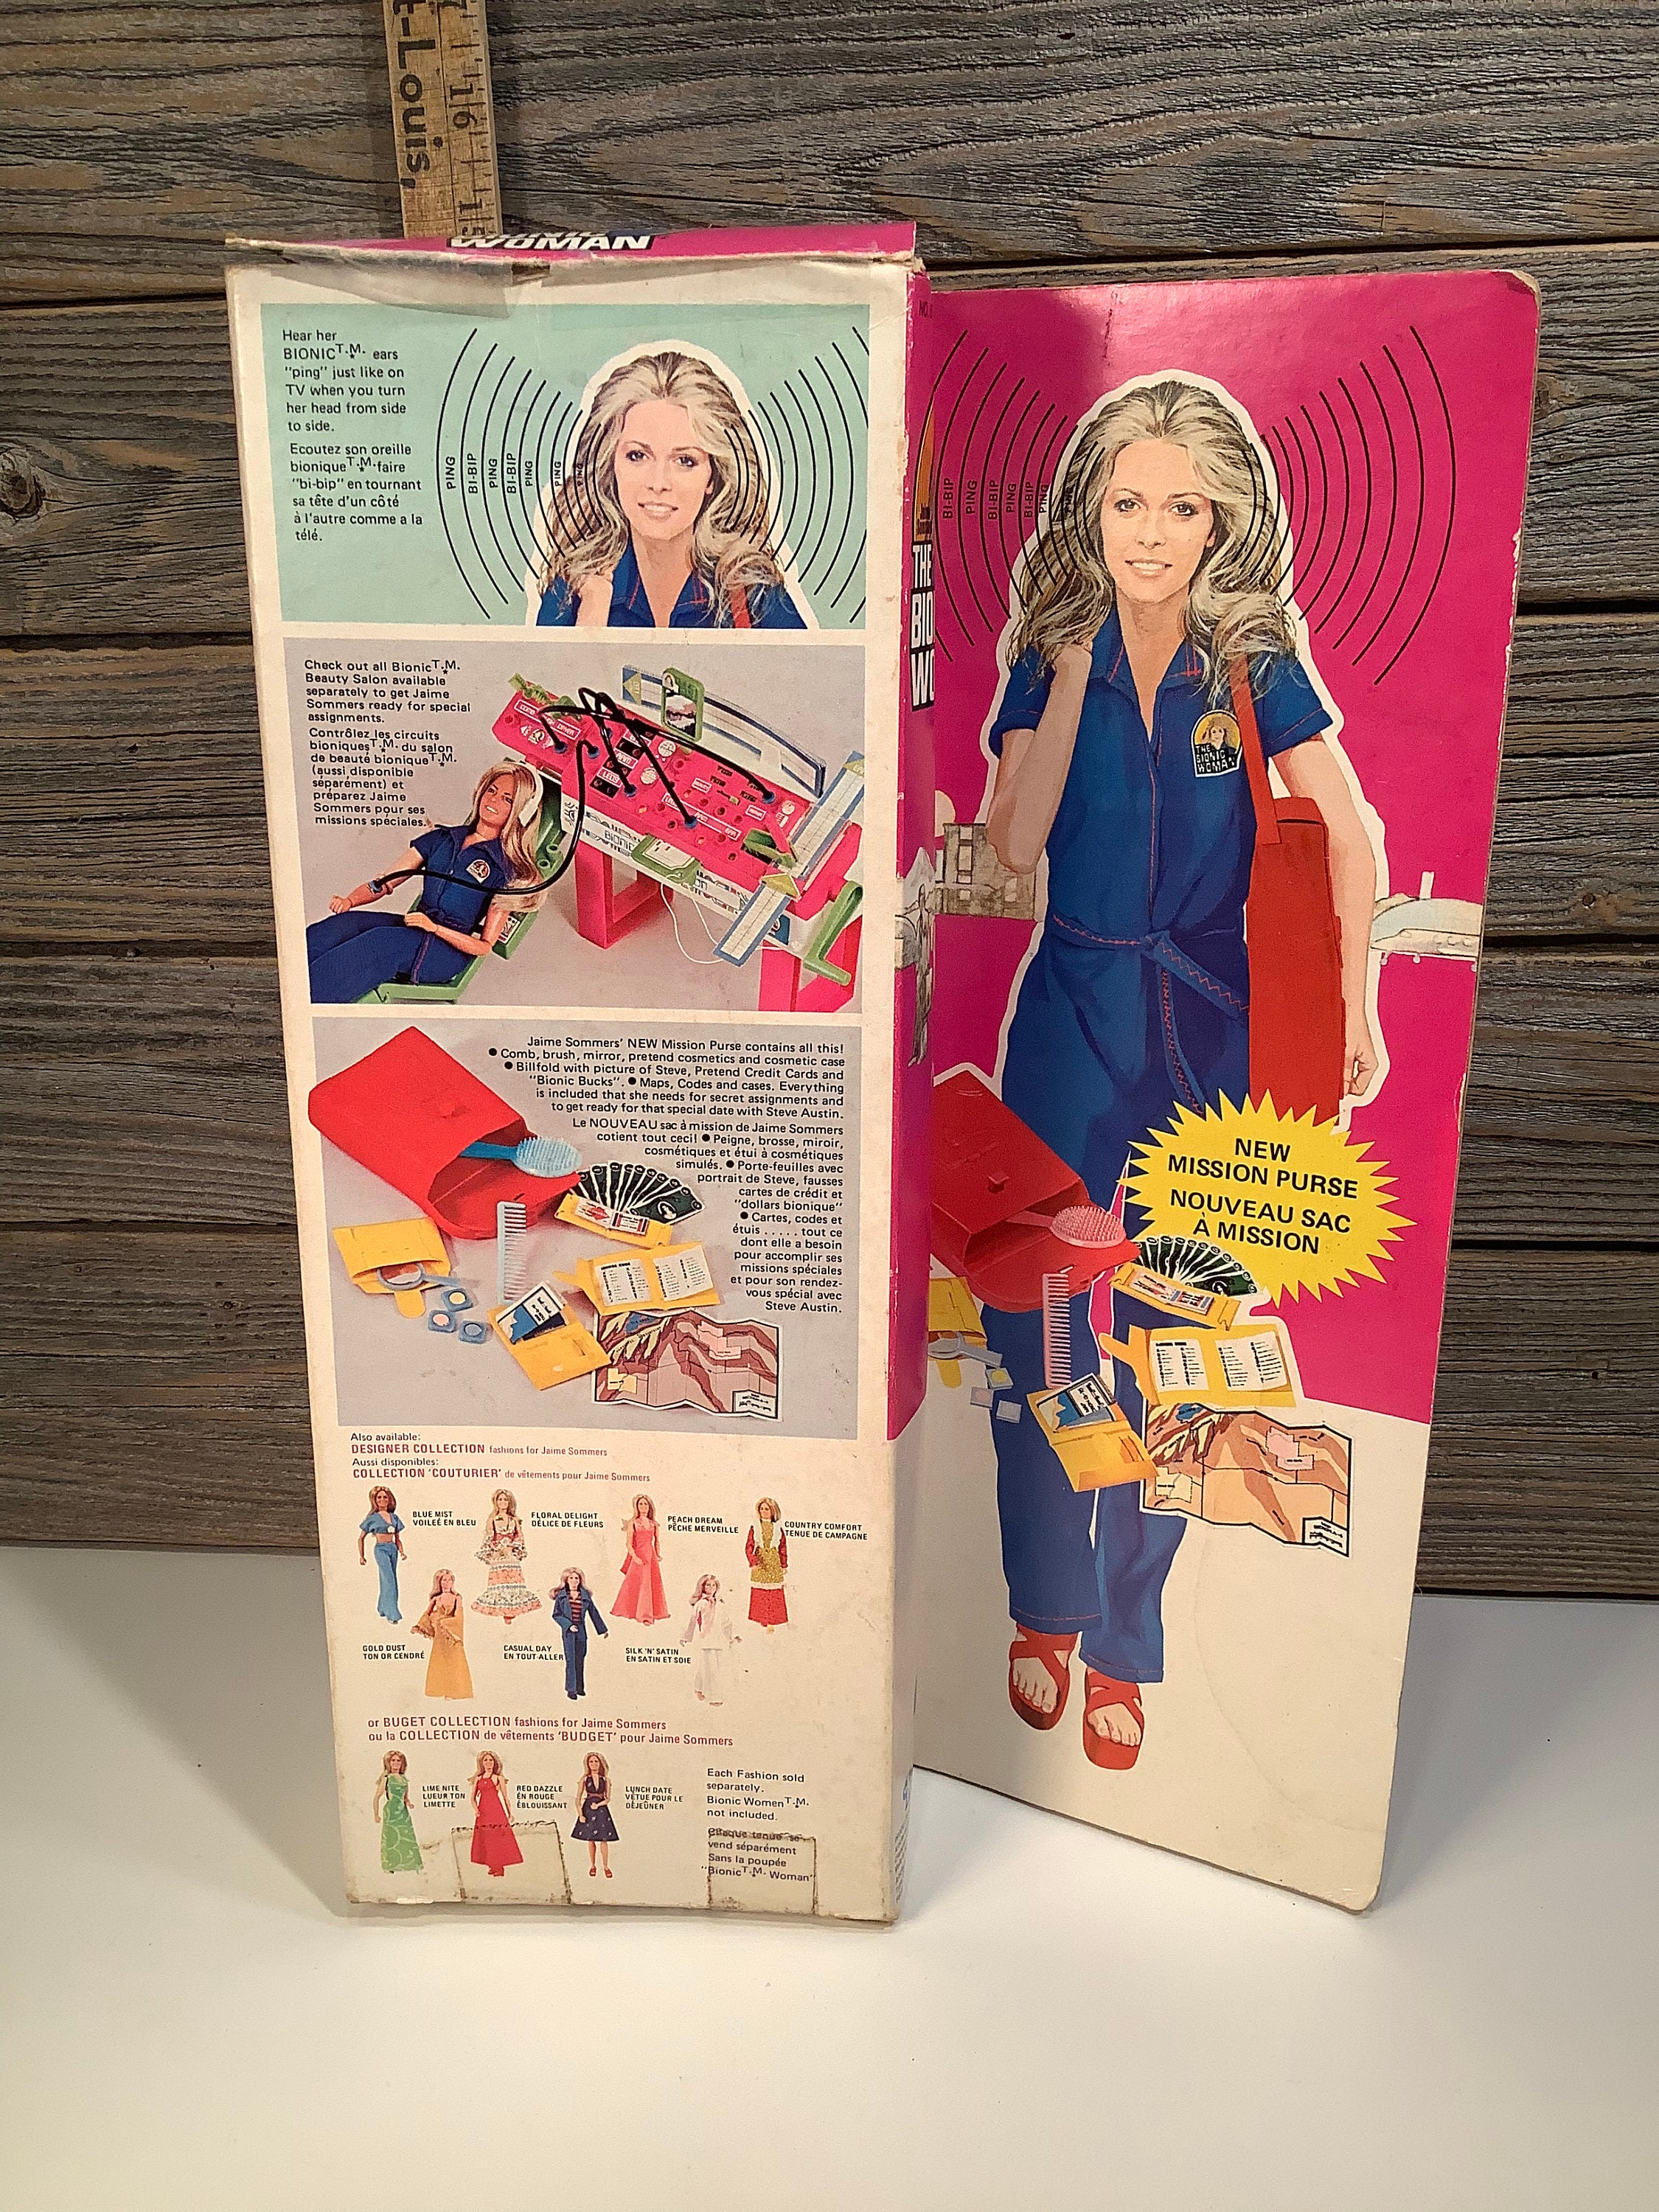 Vintage Kenner the Bionic Woman 1977 in Box -  Canada